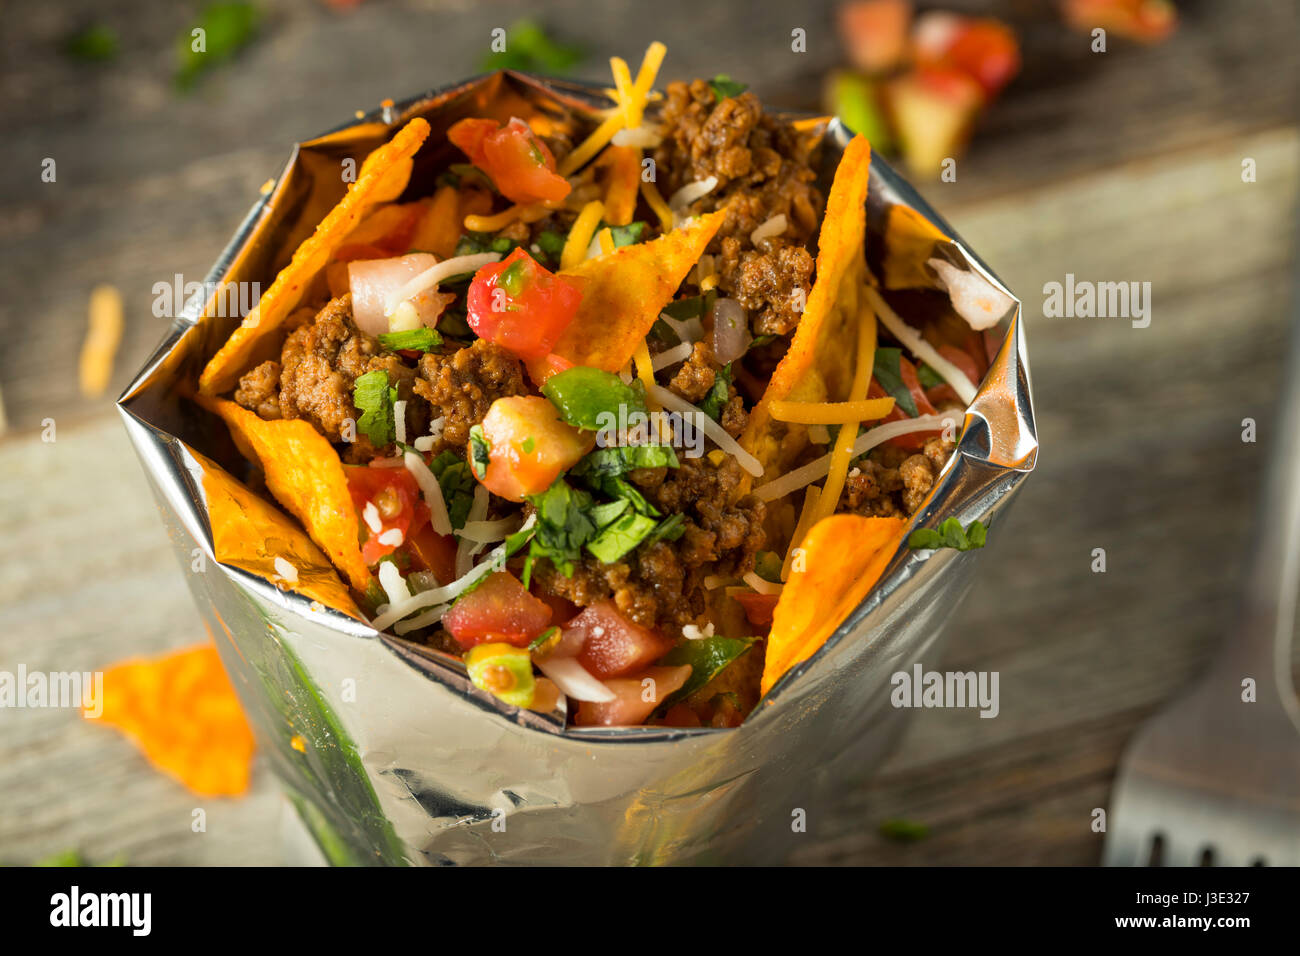 Homemade Beef Walking Taco in a Bag with Chips Stock Photo